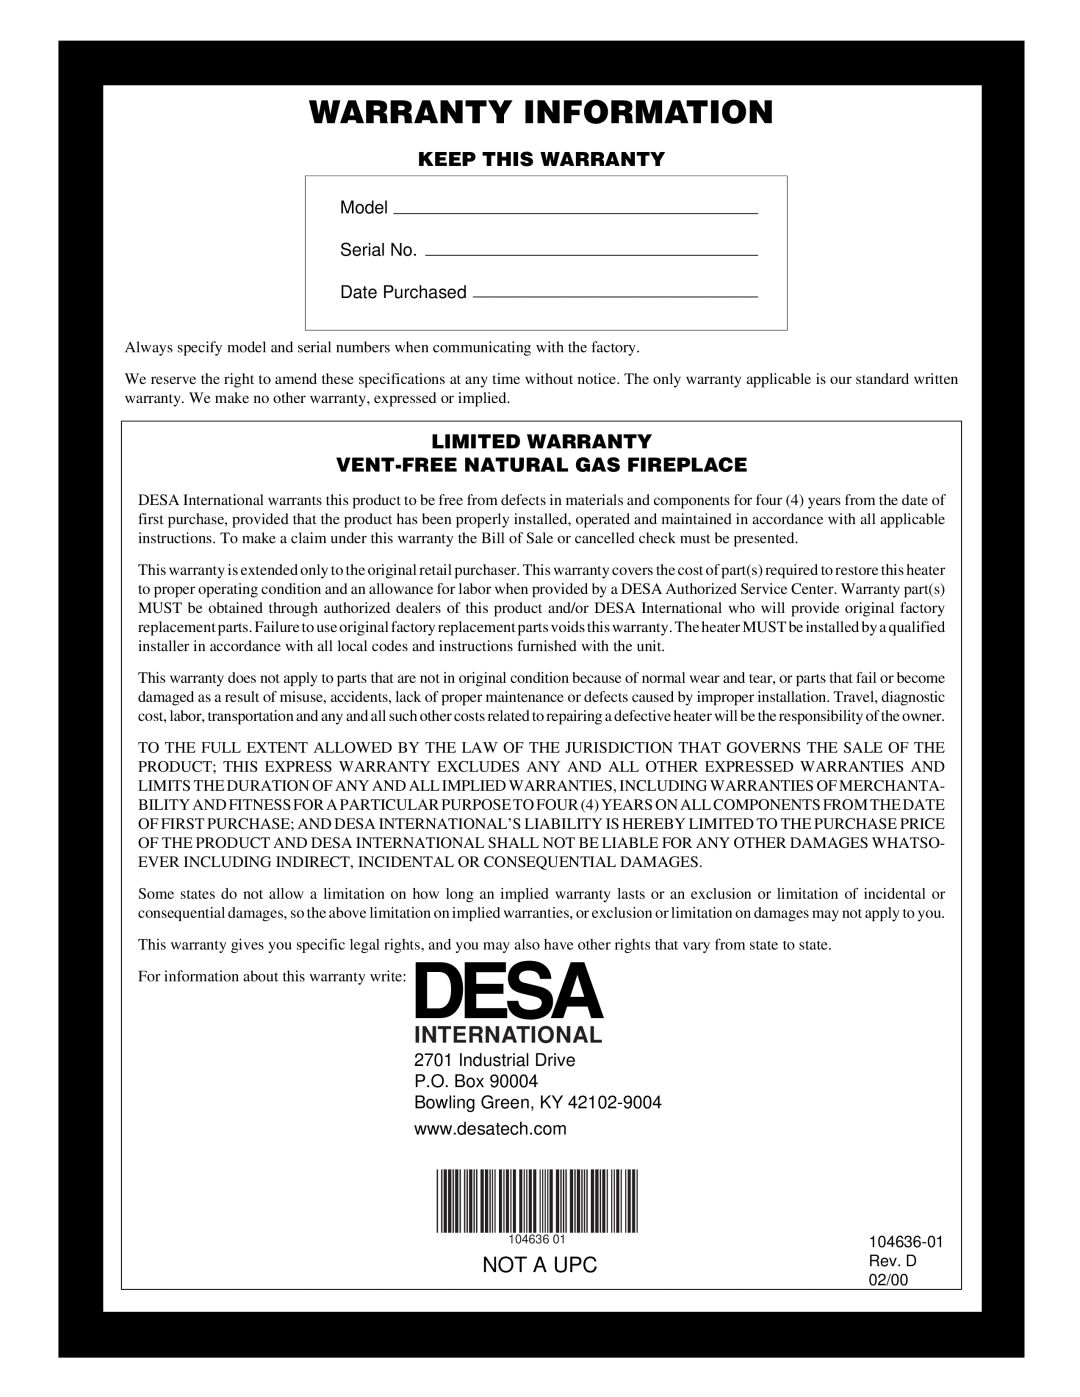 Desa VCGF30NR installation manual Warranty Information, International, Not A Upc, Model Serial No Date Purchased 